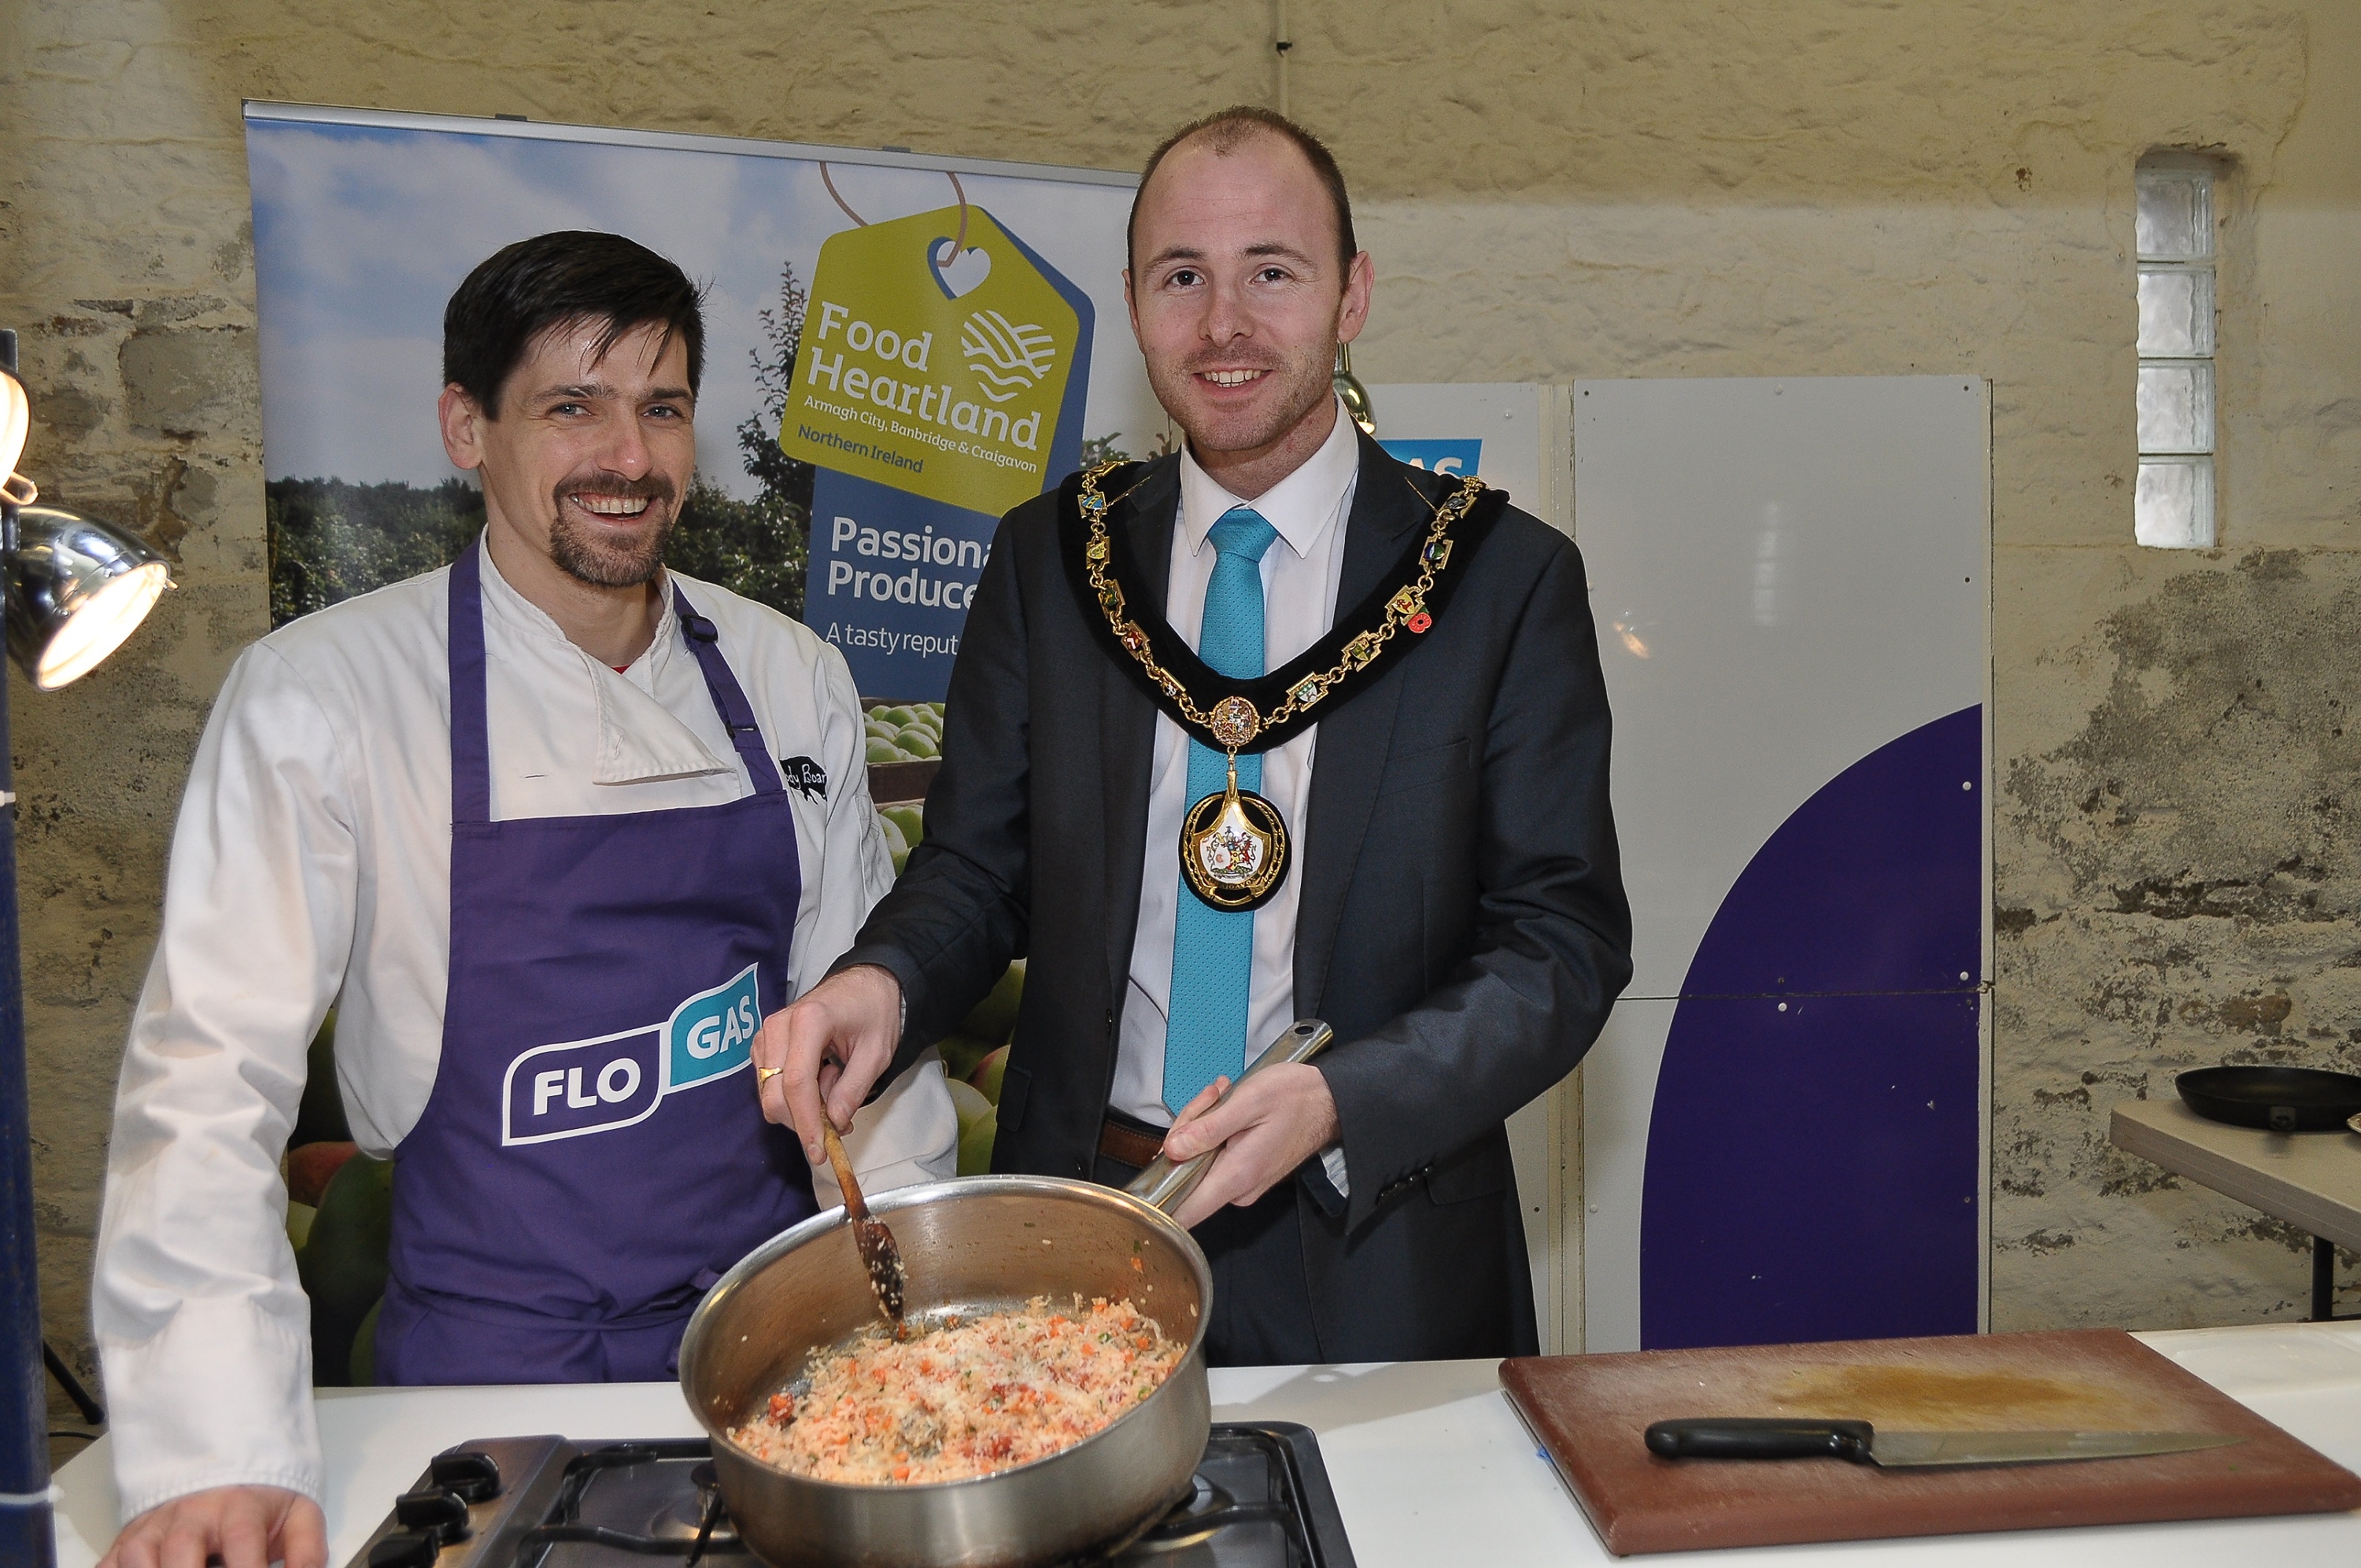 Lord Mayor of Armagh, Banbridge and Craigavon Councillor Darryn Causby with chef Sean Farnan - CREDIT: LiamMcArdle.com